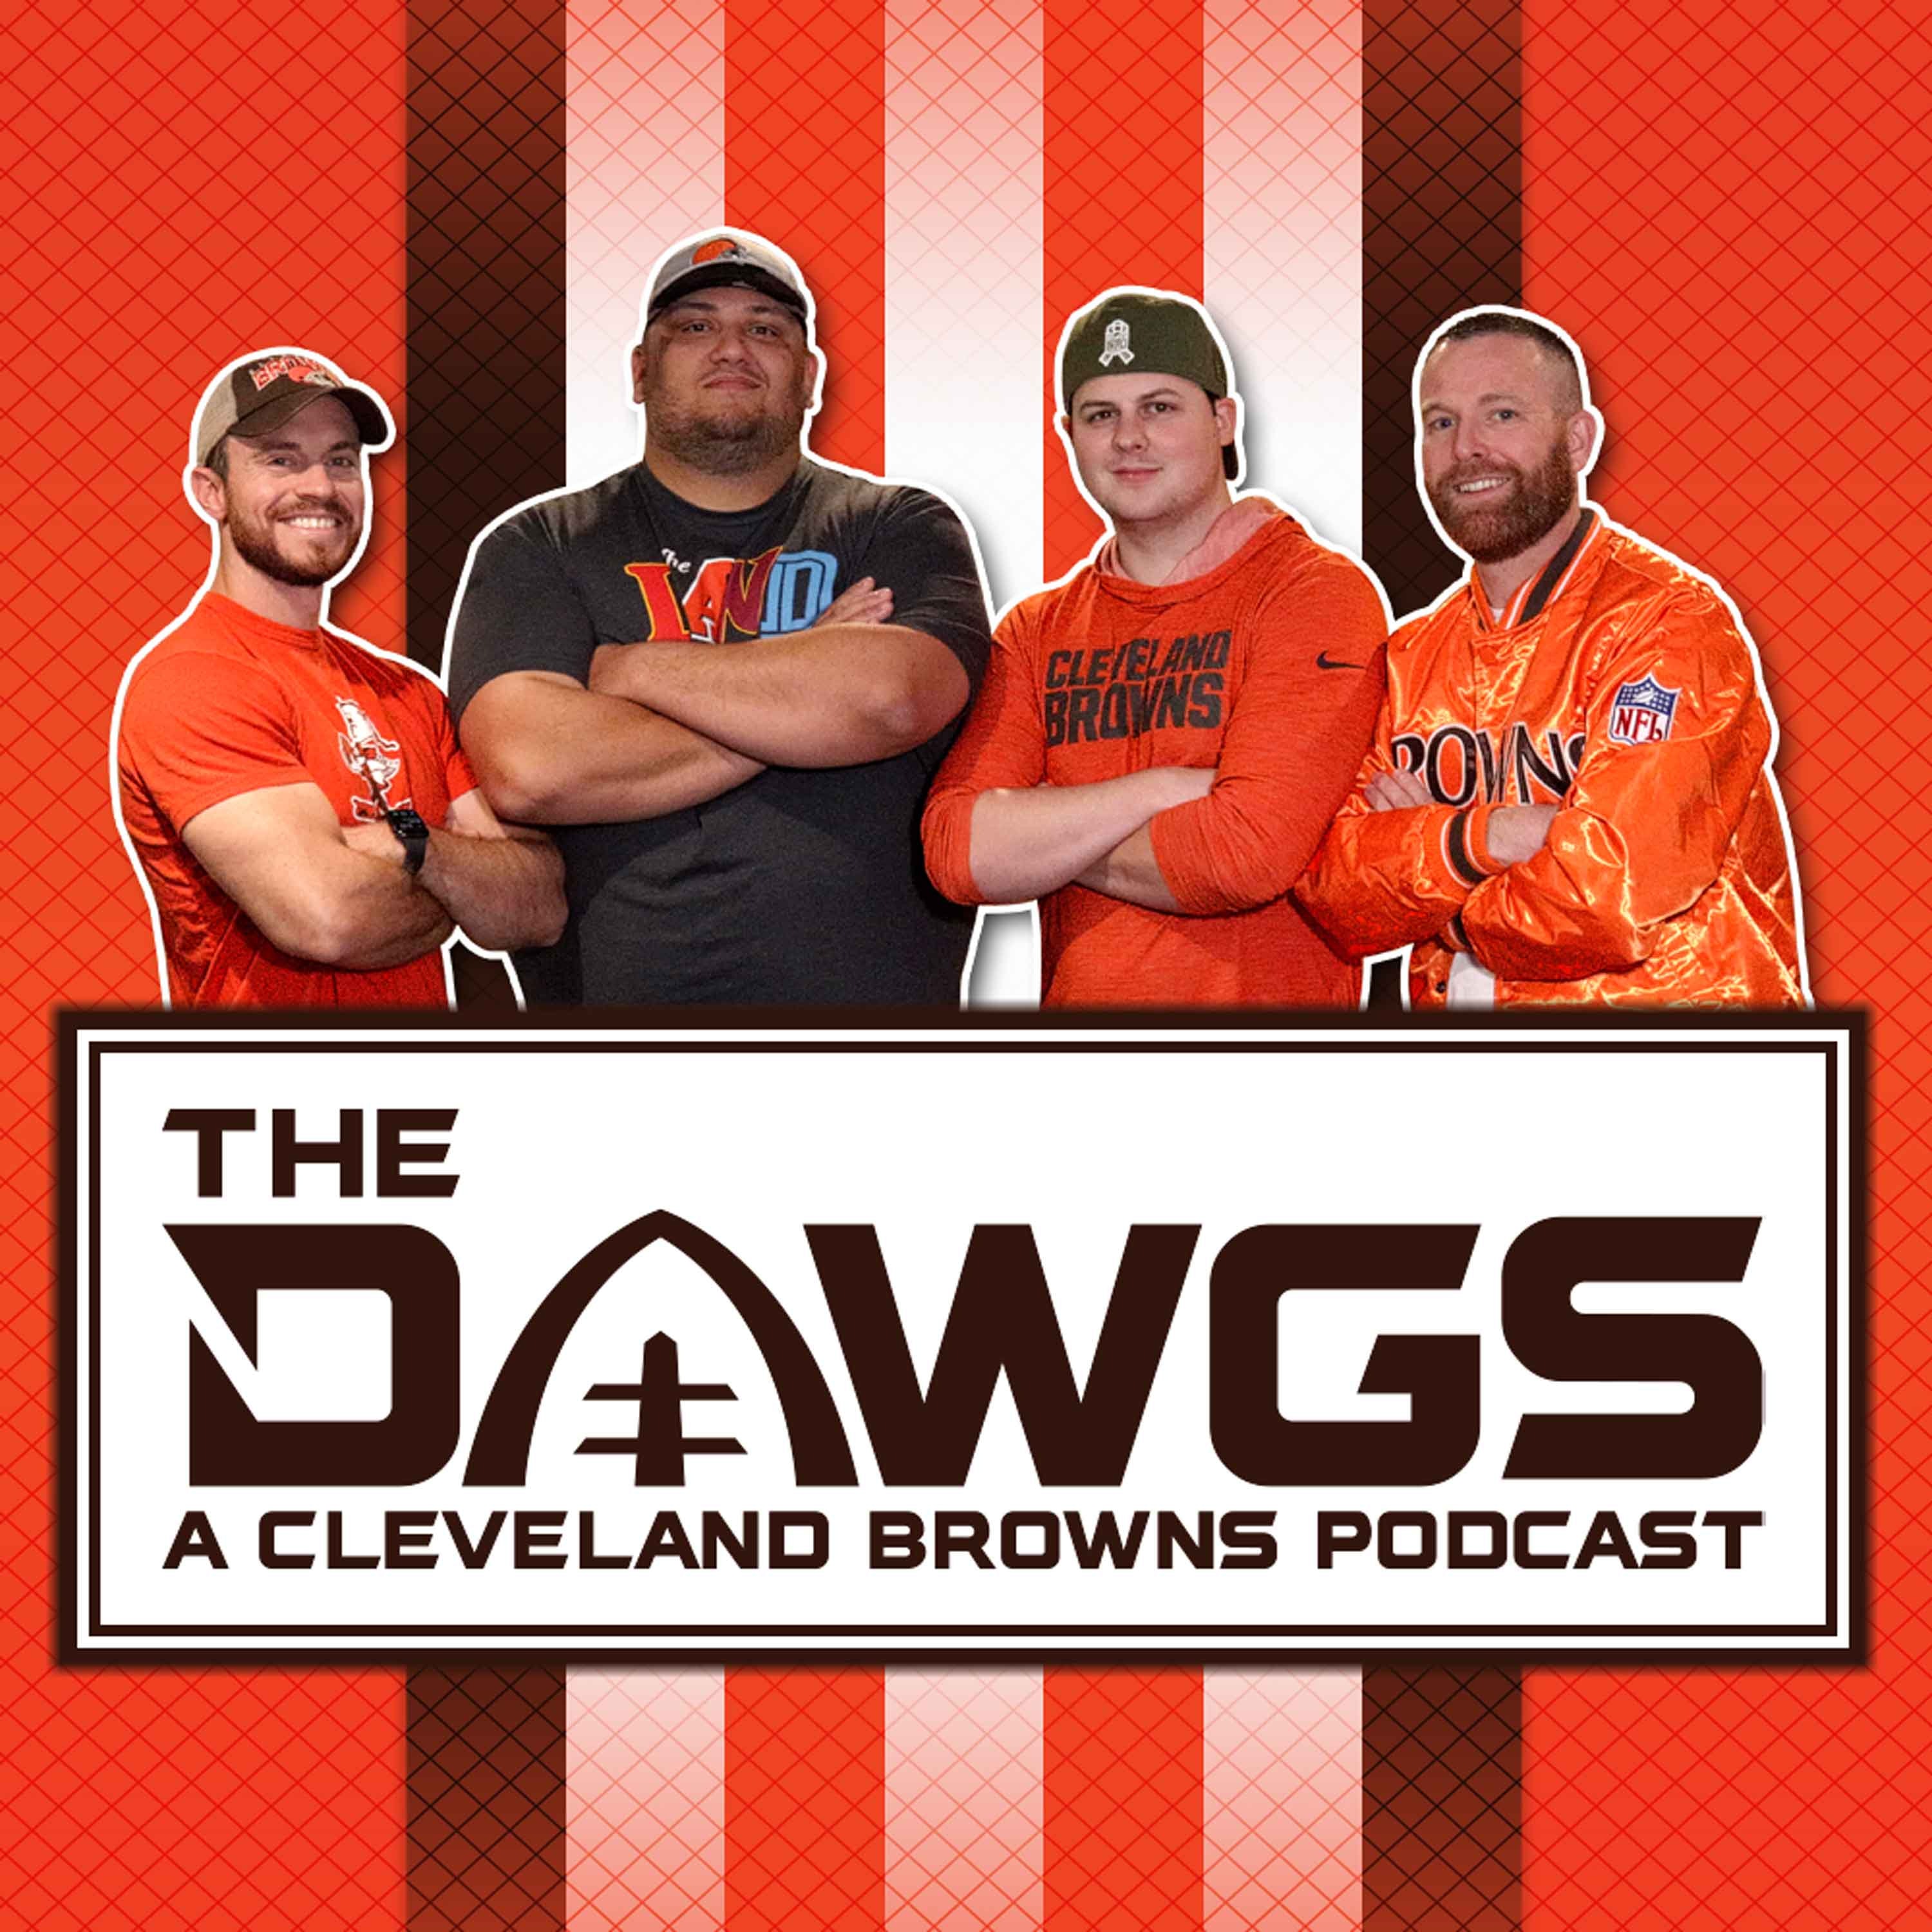 Bears Recap, Final Roster Cuts, and Baker Mayfield’s Comments  | The Dawgs - A Cleveland Browns Podcast - September 1, 2022